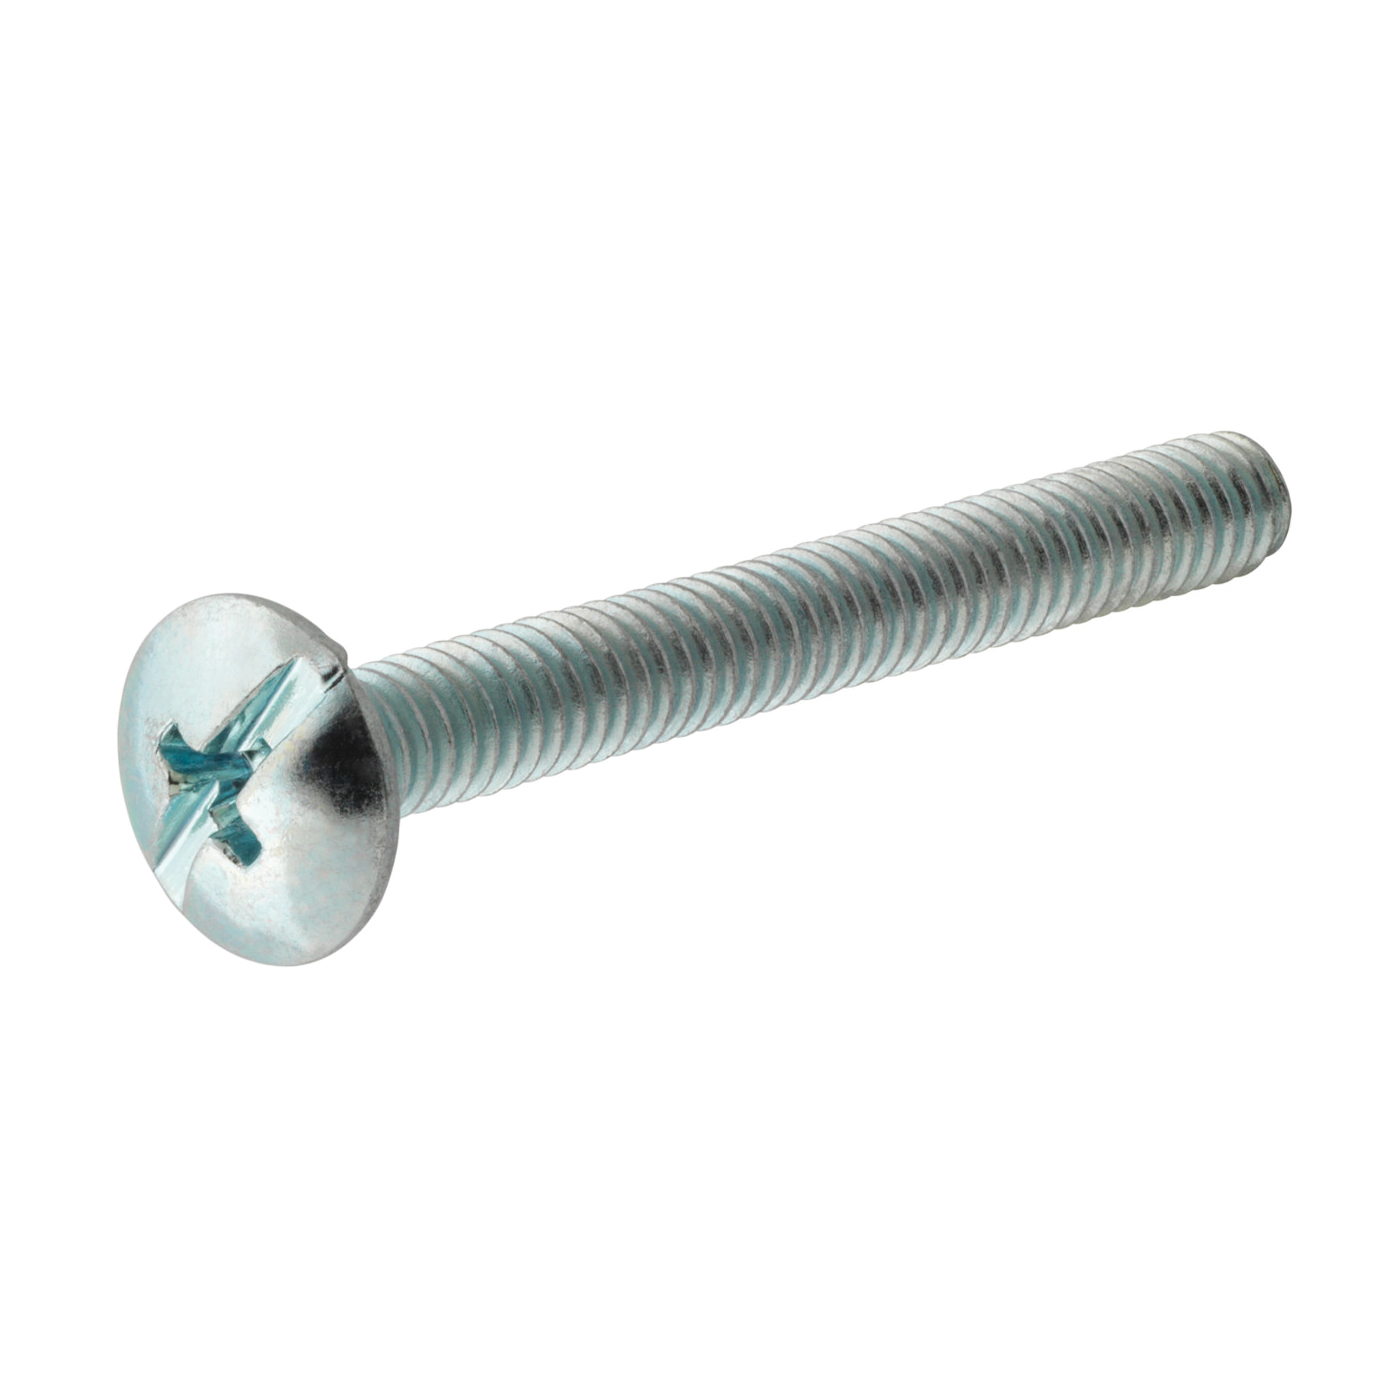 881050 Machine Screw, #8-32 Thread, 1-5/8 in L, Truss Head, Phillips, Slotted Drive, Stainless Steel